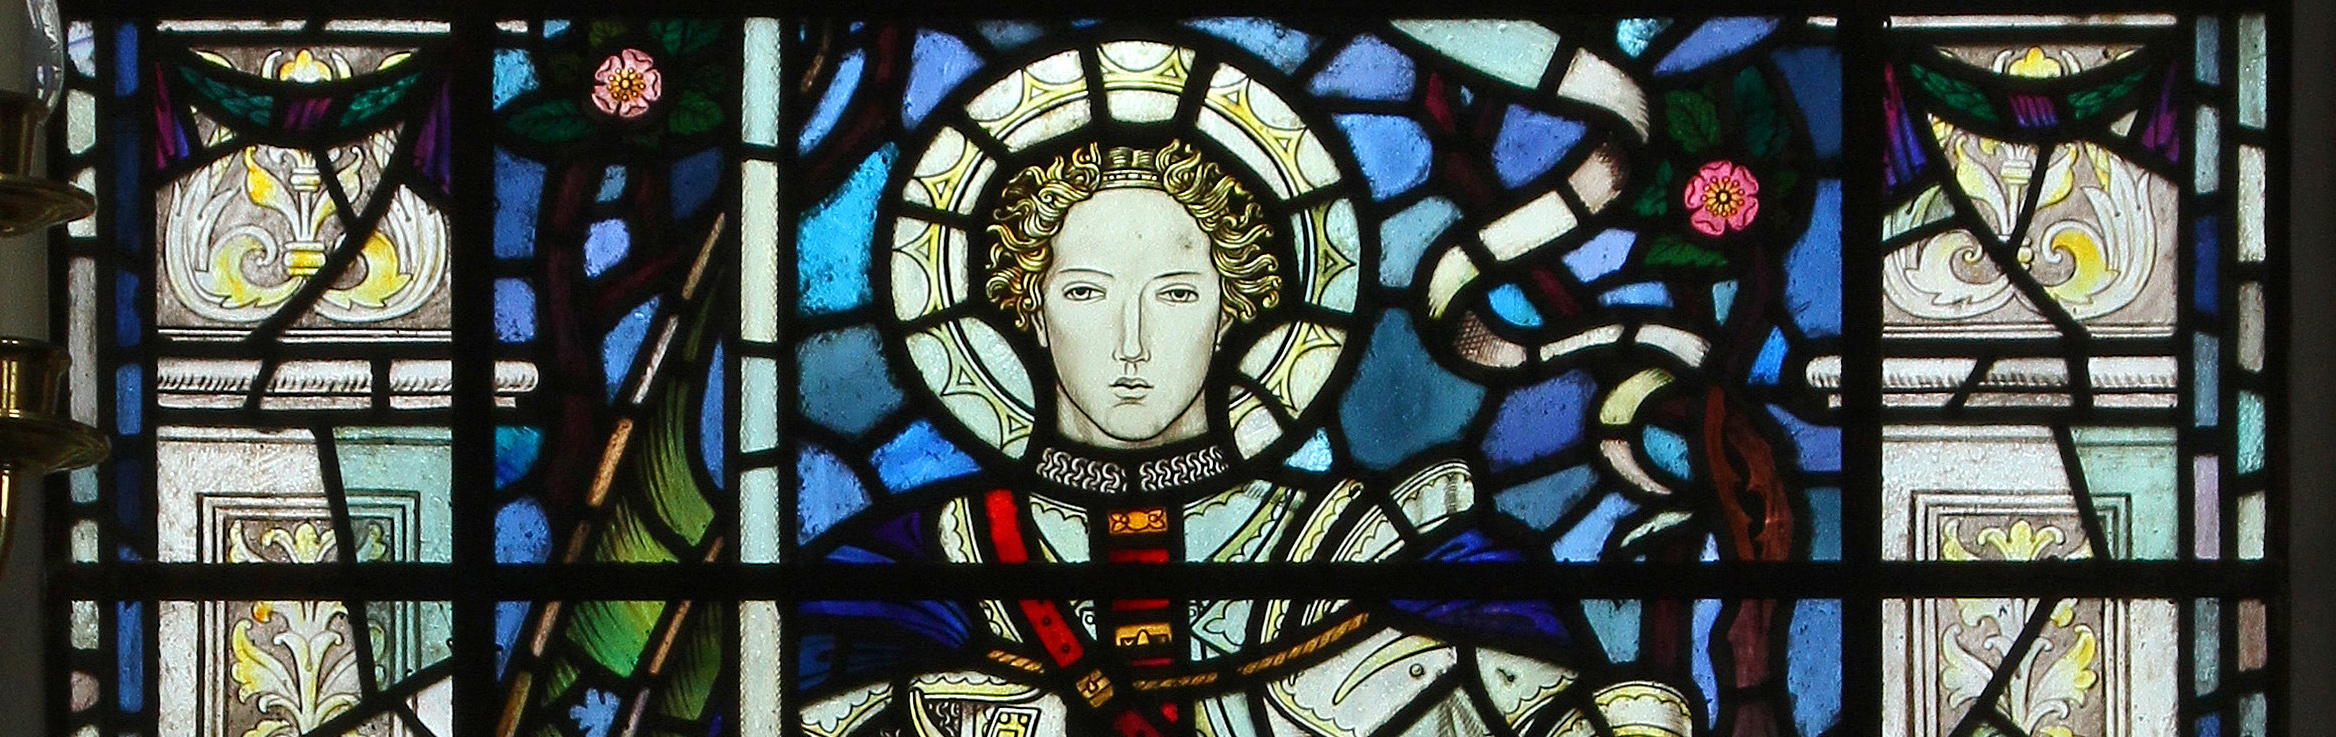 Details from North Aisle window of St George